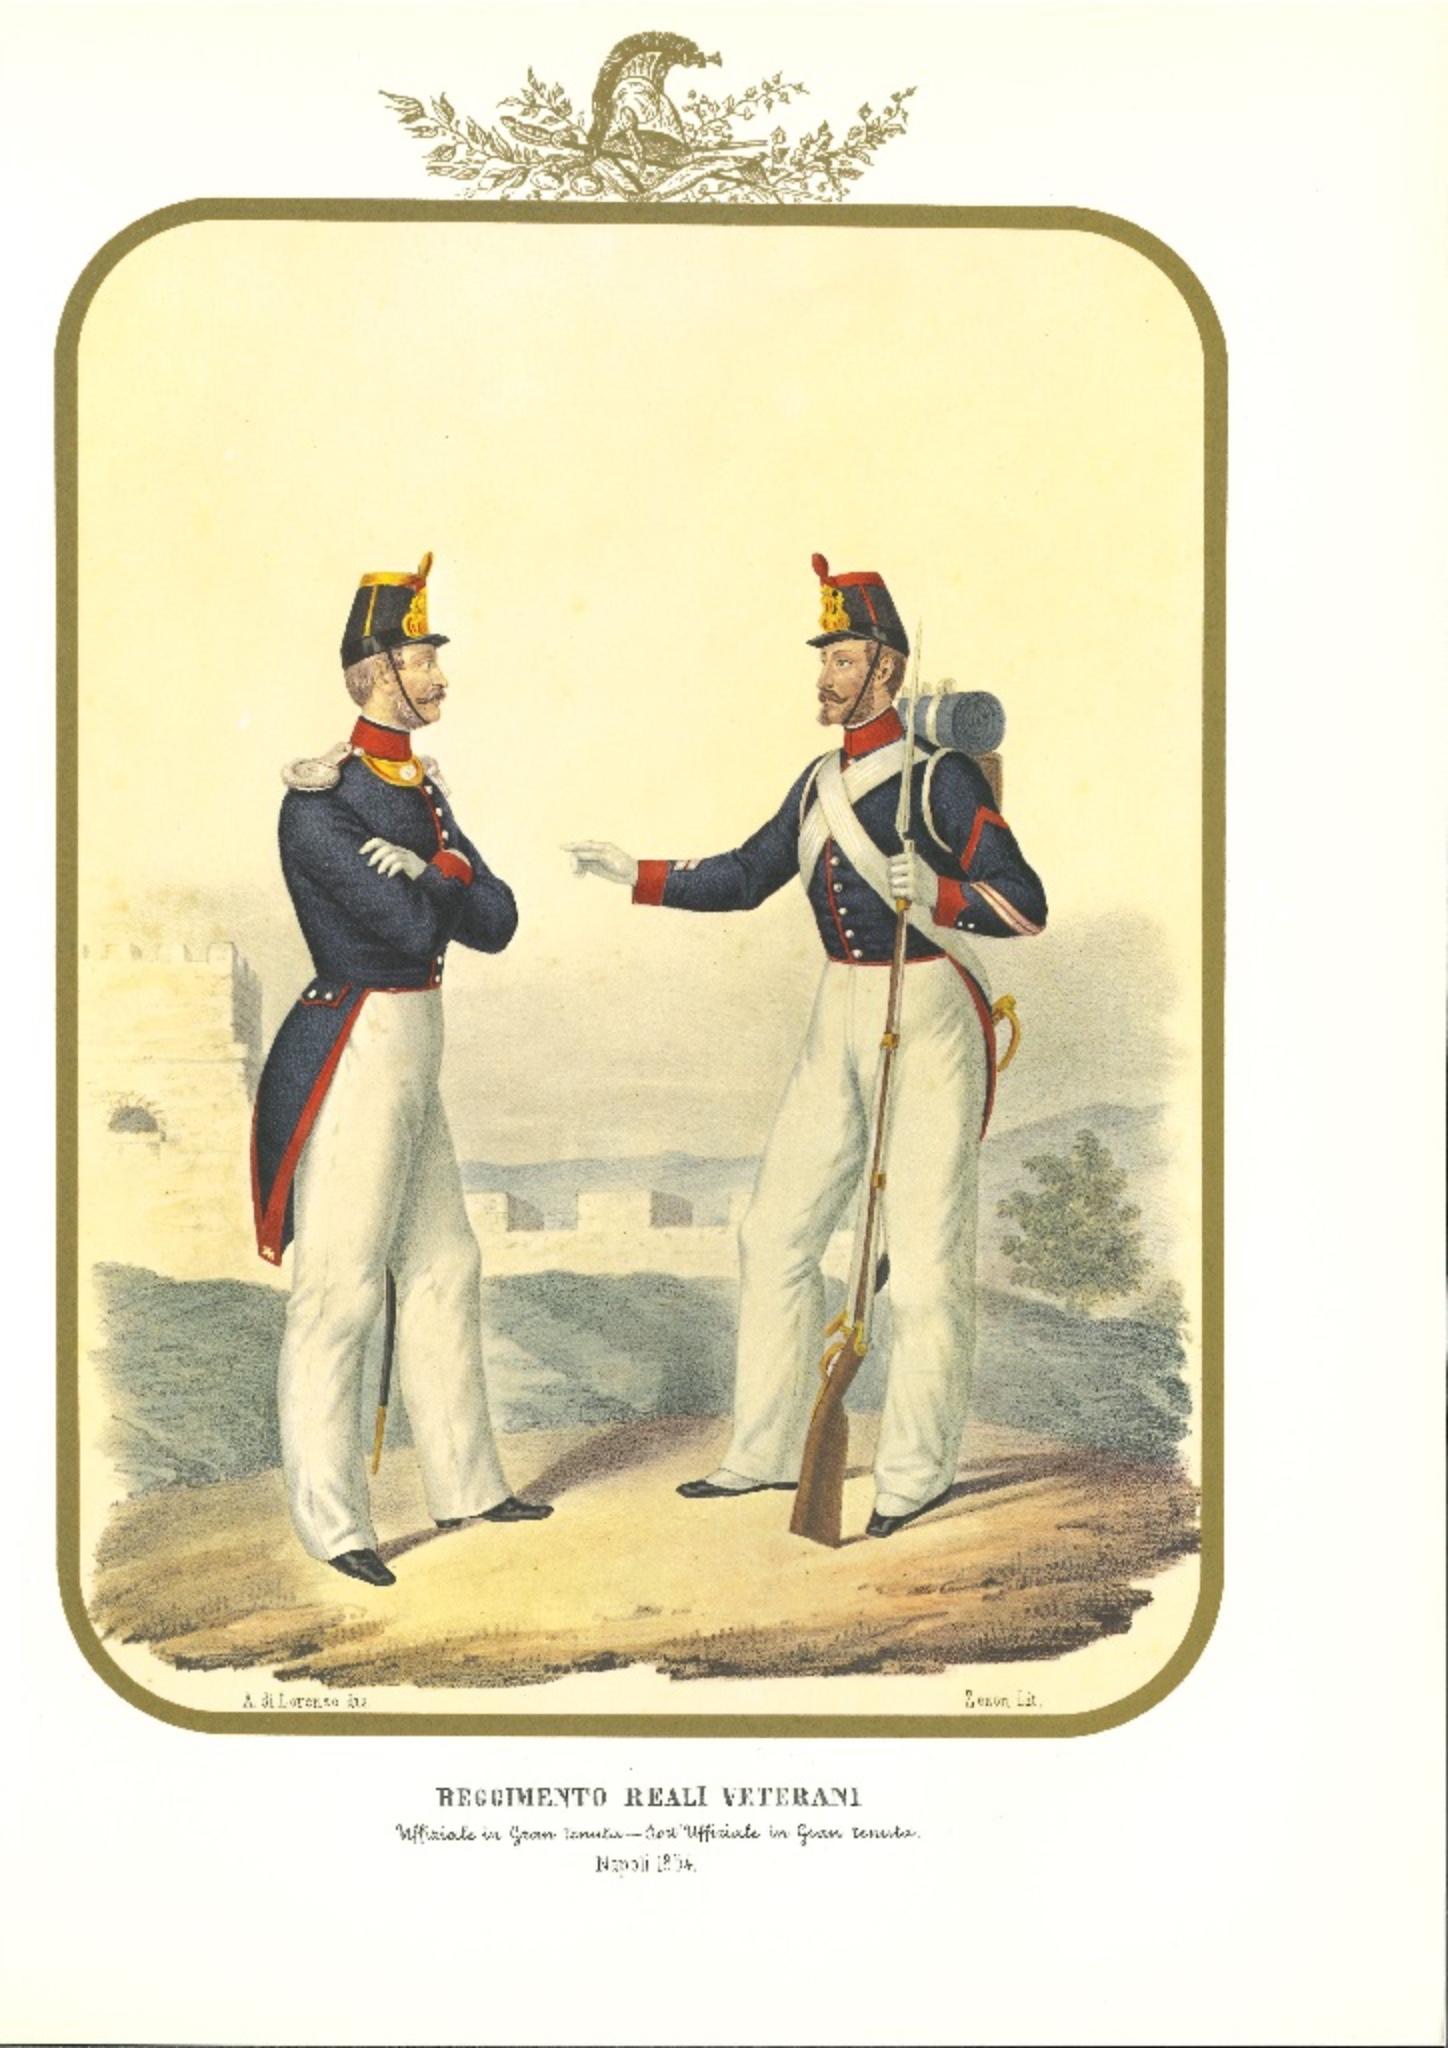 Royal Veterans Regiment is an original lithograph by Antonio Zezon. Naples 1854.

Interesting colored lithograph which describes some members of the Army: An Officer and a sub-Officer in dressing uniform.

In excellent condition, this print belongs